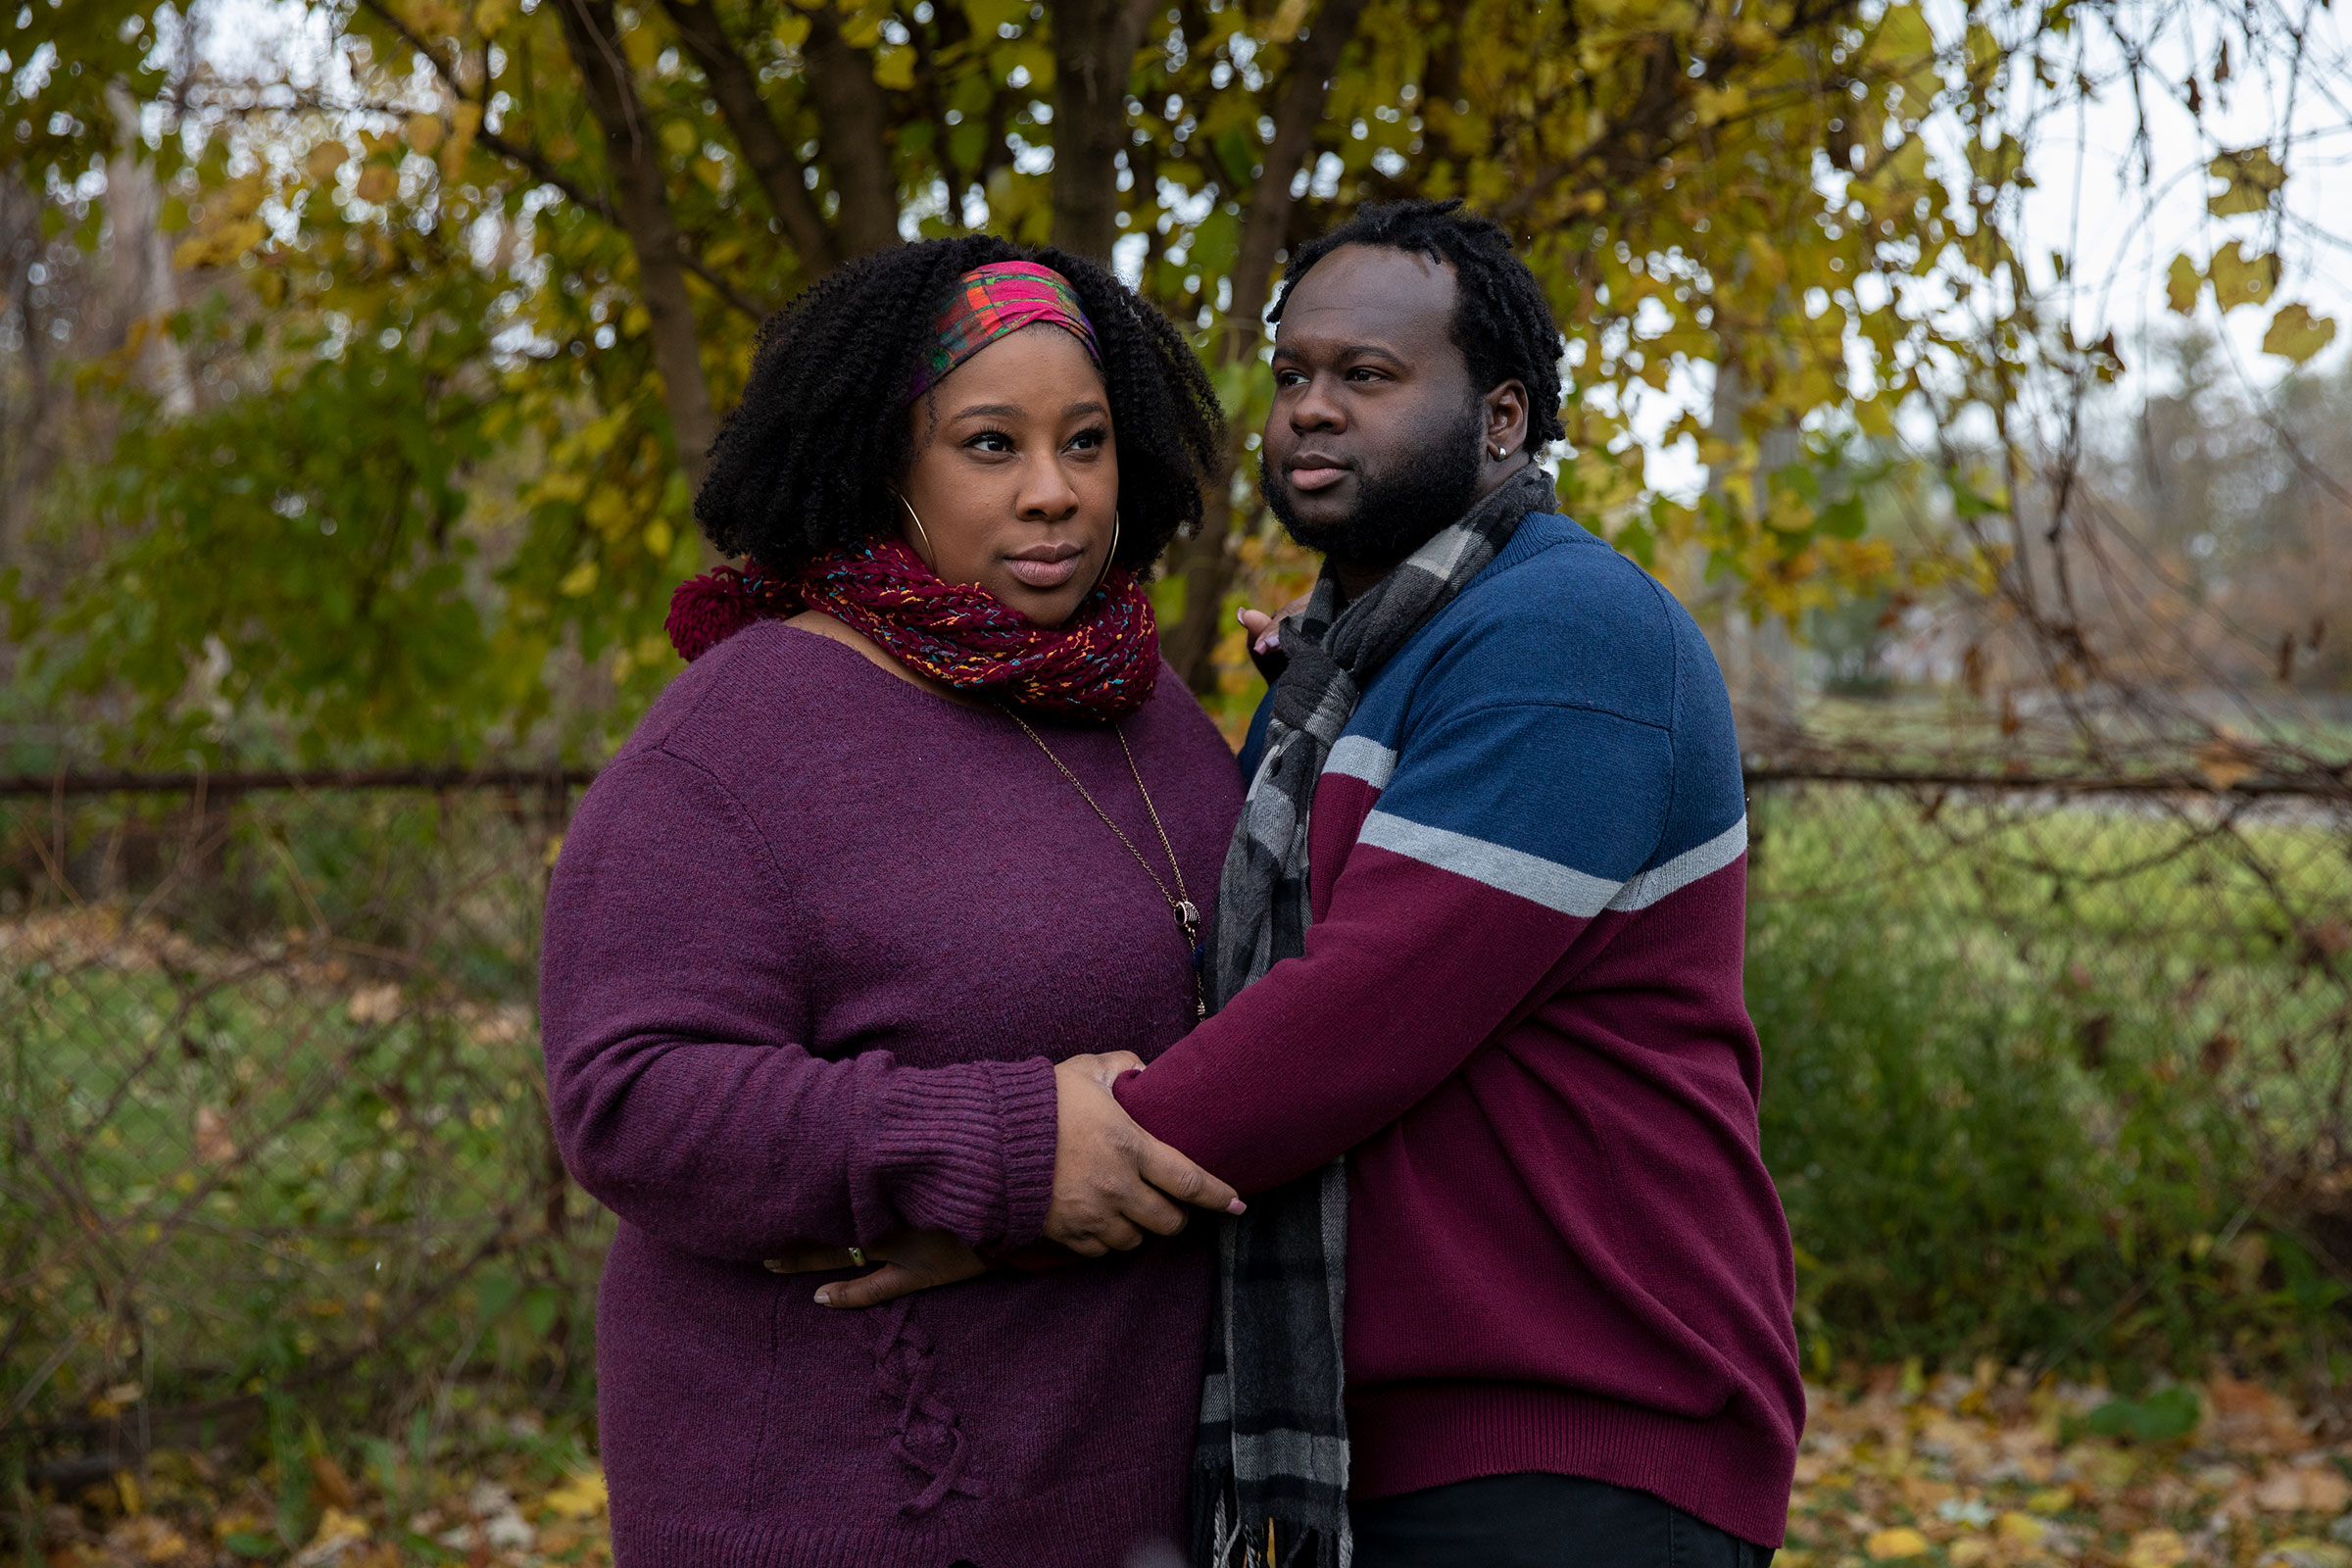 Aaron Jarvis poses for a portrait with her husband Marty Jarvis outside of their home in Detroit, Mich. on Nov. 1, 2020